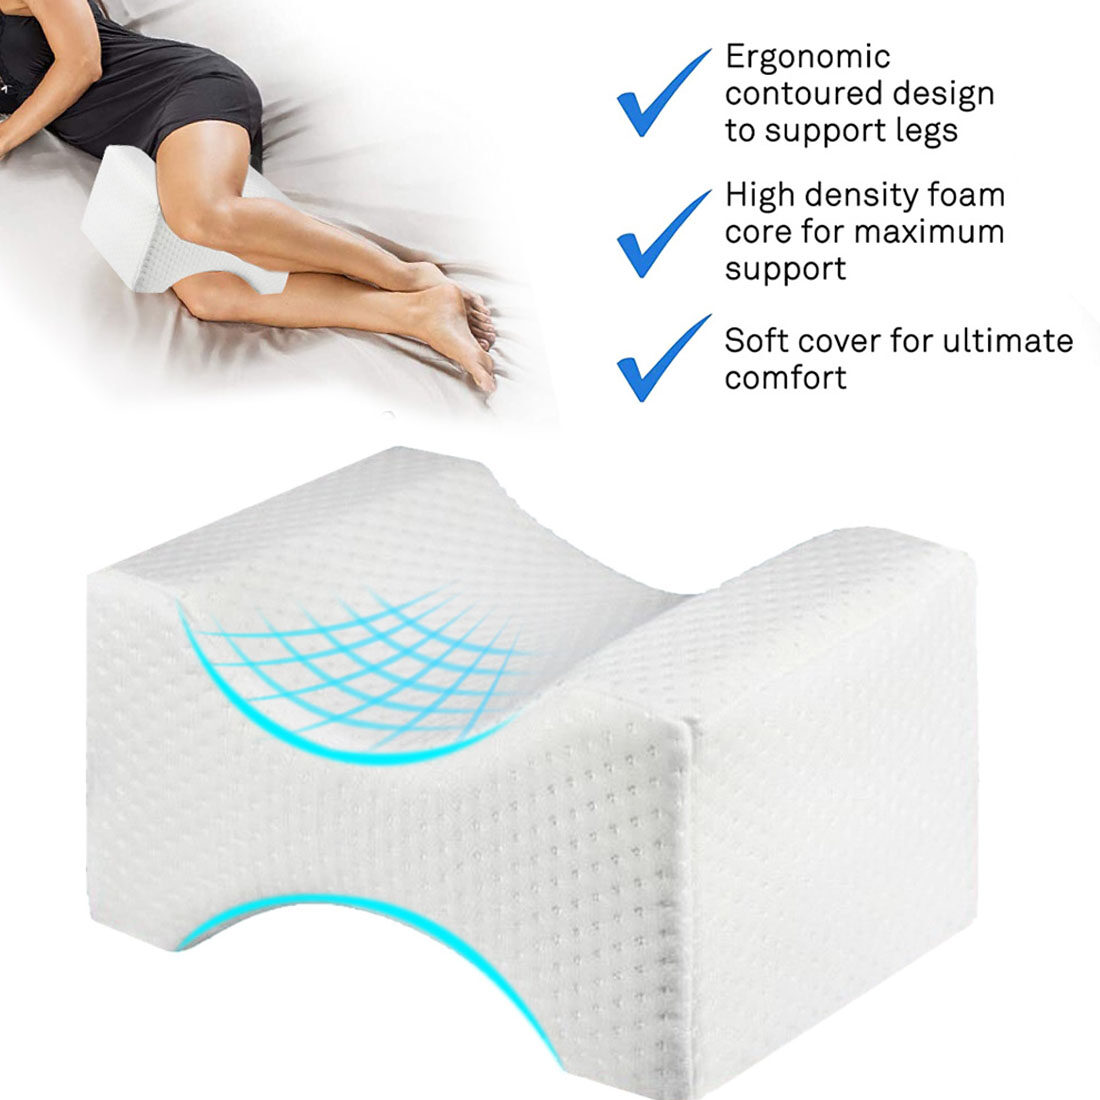 Knee Pillow for Side Sleepers Memory Foam Wedge Leg Pillow Sciatica Back  Hip Joint Pain Relief Side Sleeper Leg Pad Support Cushion